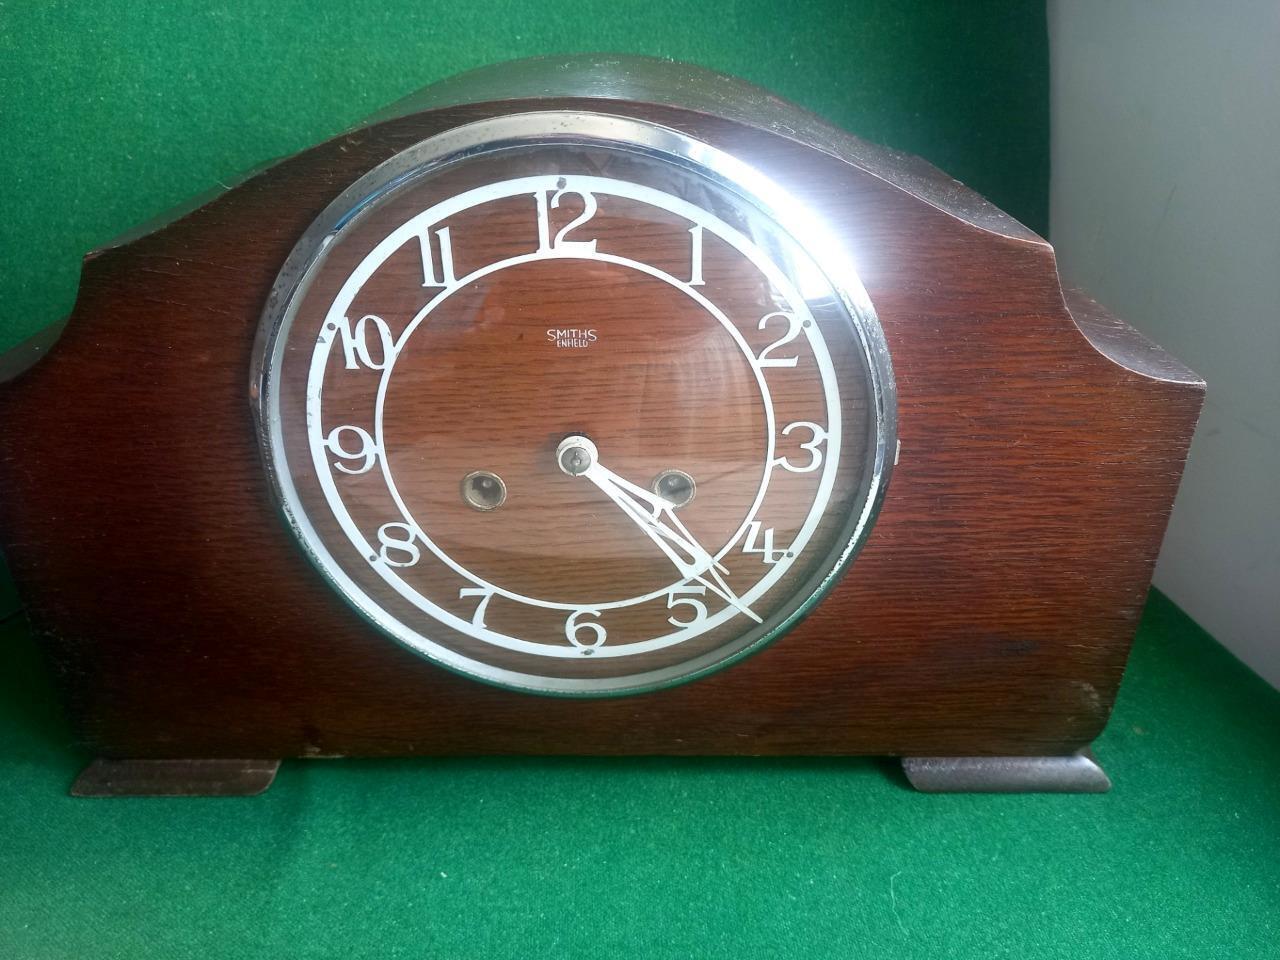 Vintage 50's Smiths Enfield mantel chiming clock tested in good working order